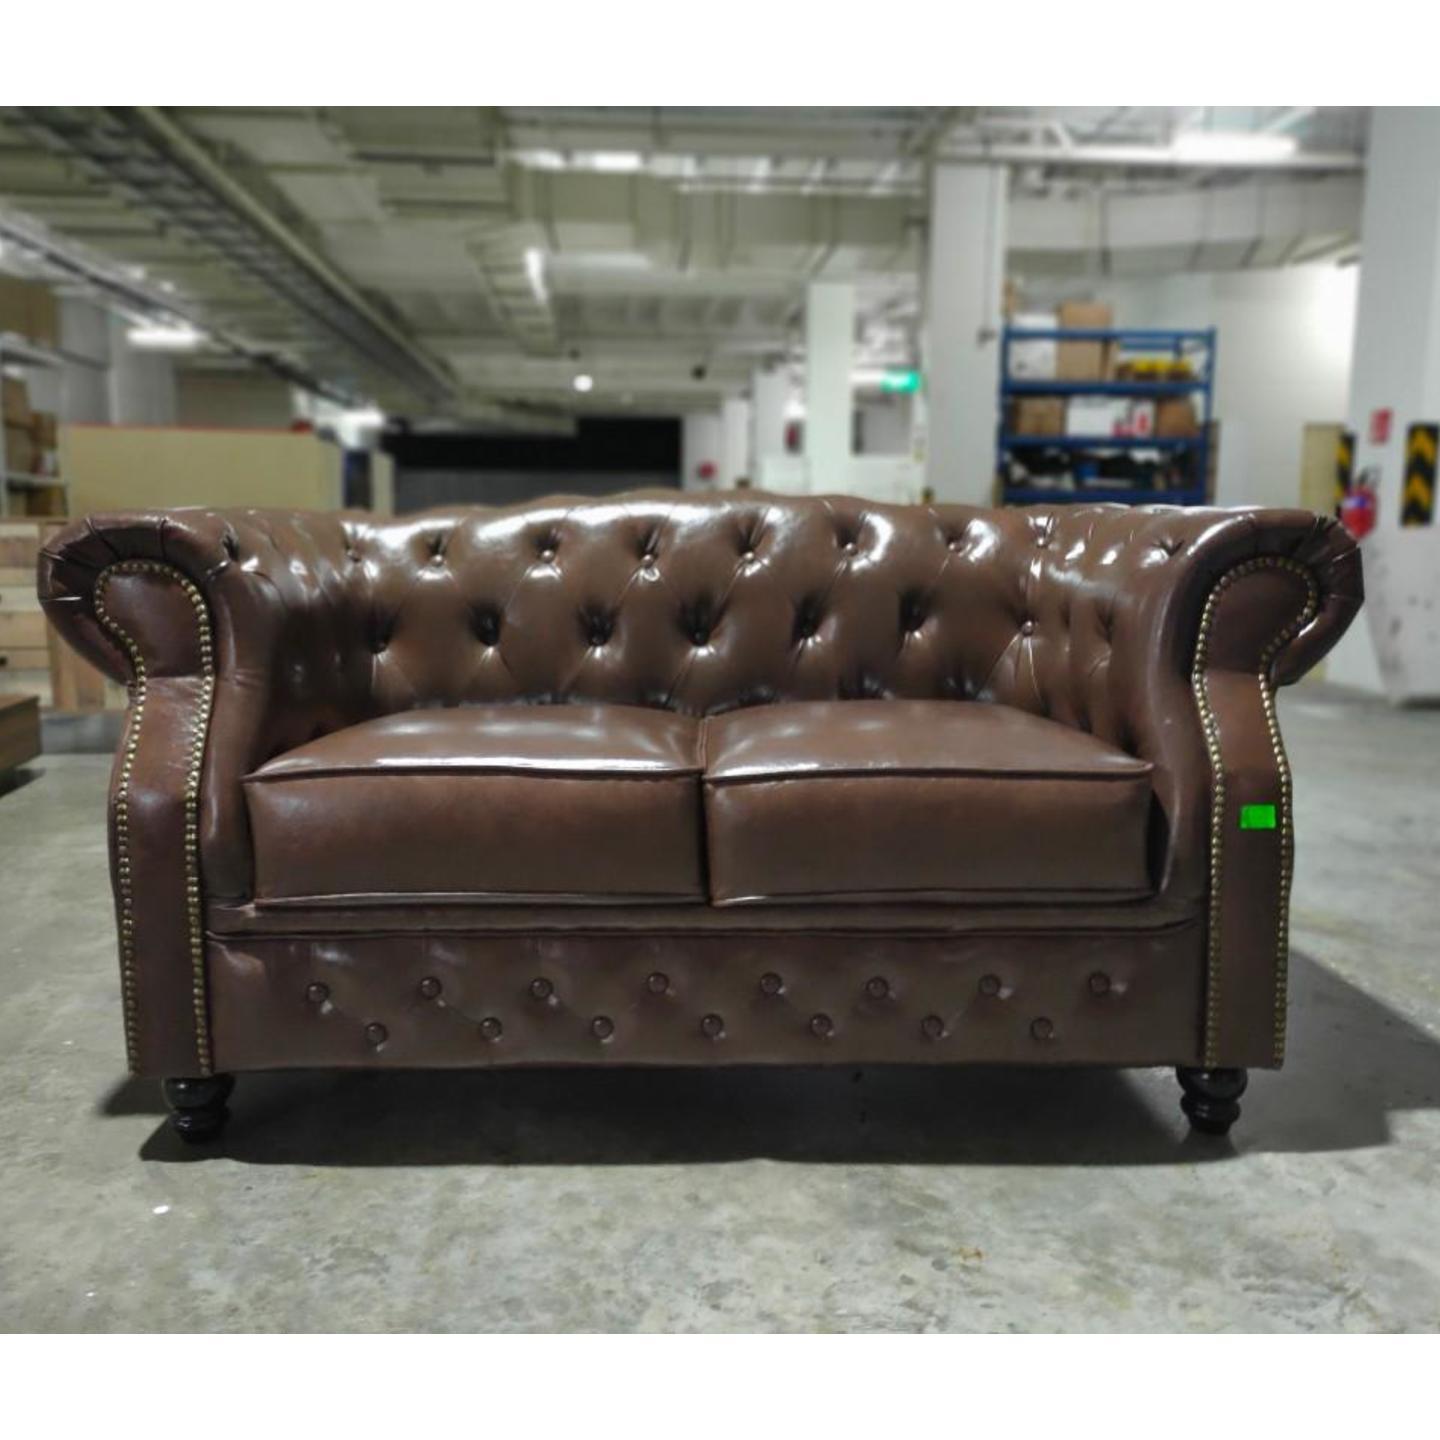 Pre Order BOTTEVA 2 Seater Chesterfield Sofa in DARK COCO BROWN - Estimated Delivery by End of June 2022